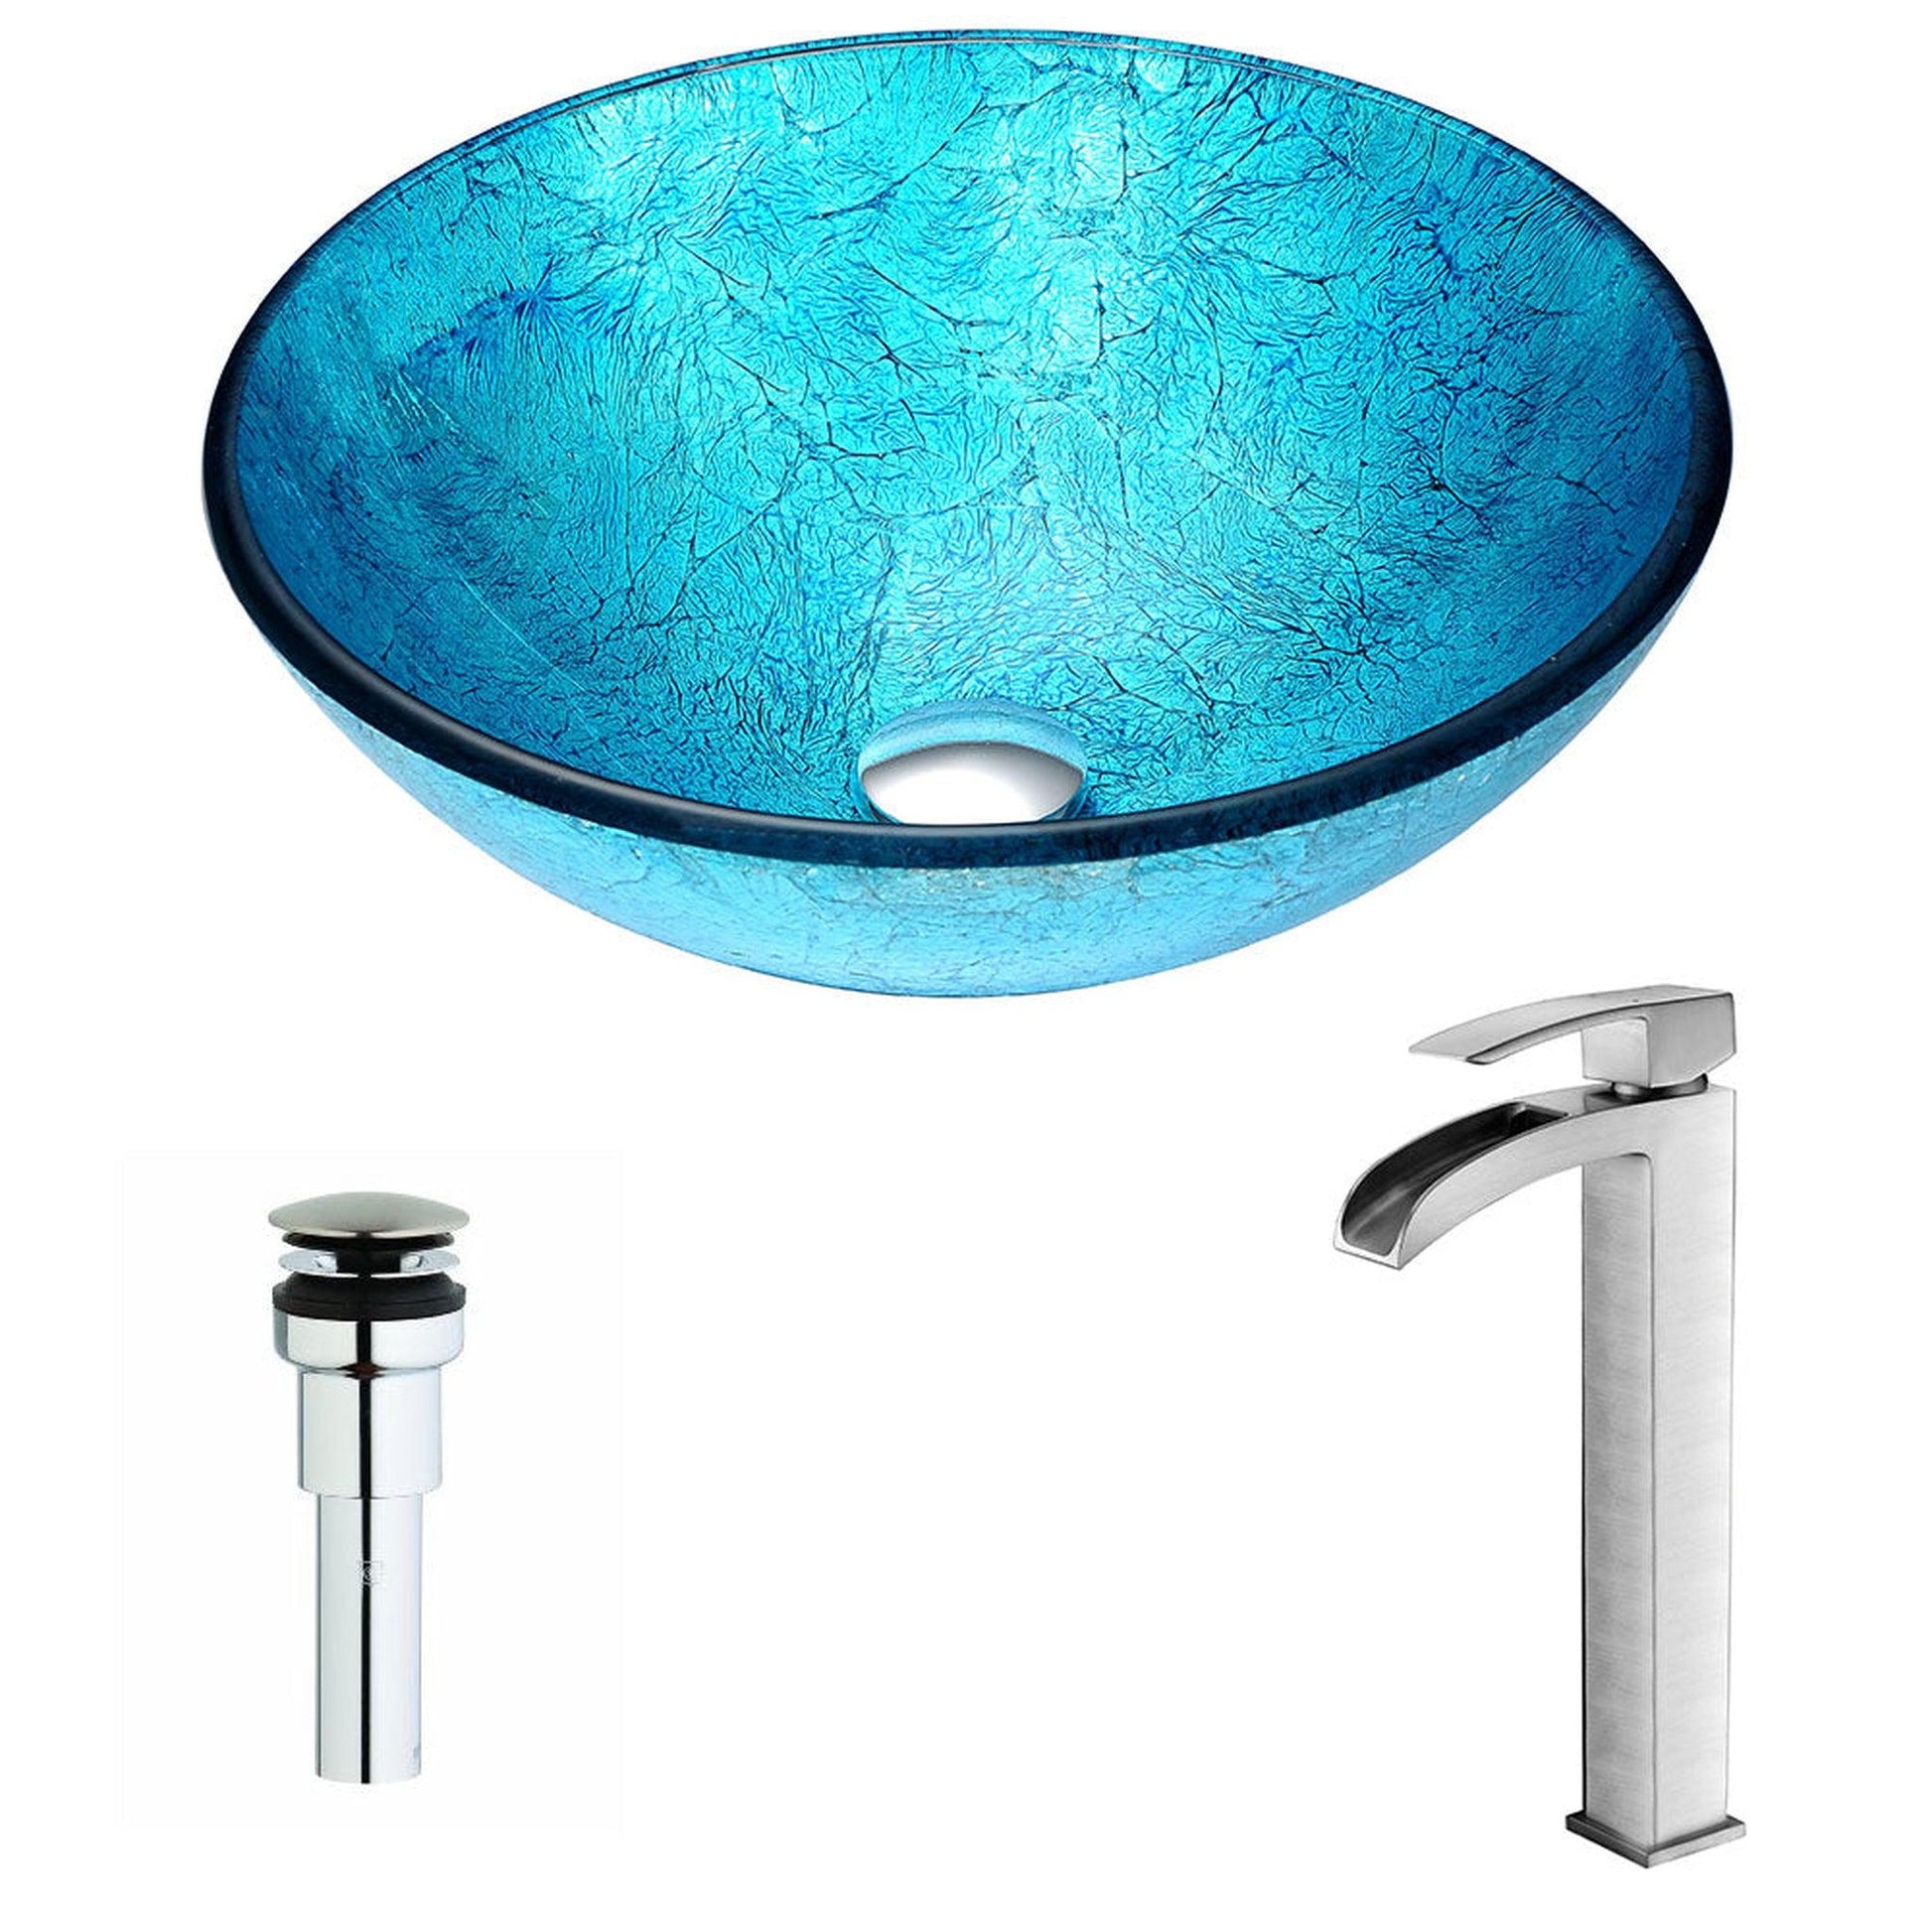 ANZZI Accent Series 17" x 17" Round Blue Ice Deco-Glass Vessel Sink With Chrome Pop-Up Drain and Brushed Nickel Key Faucet